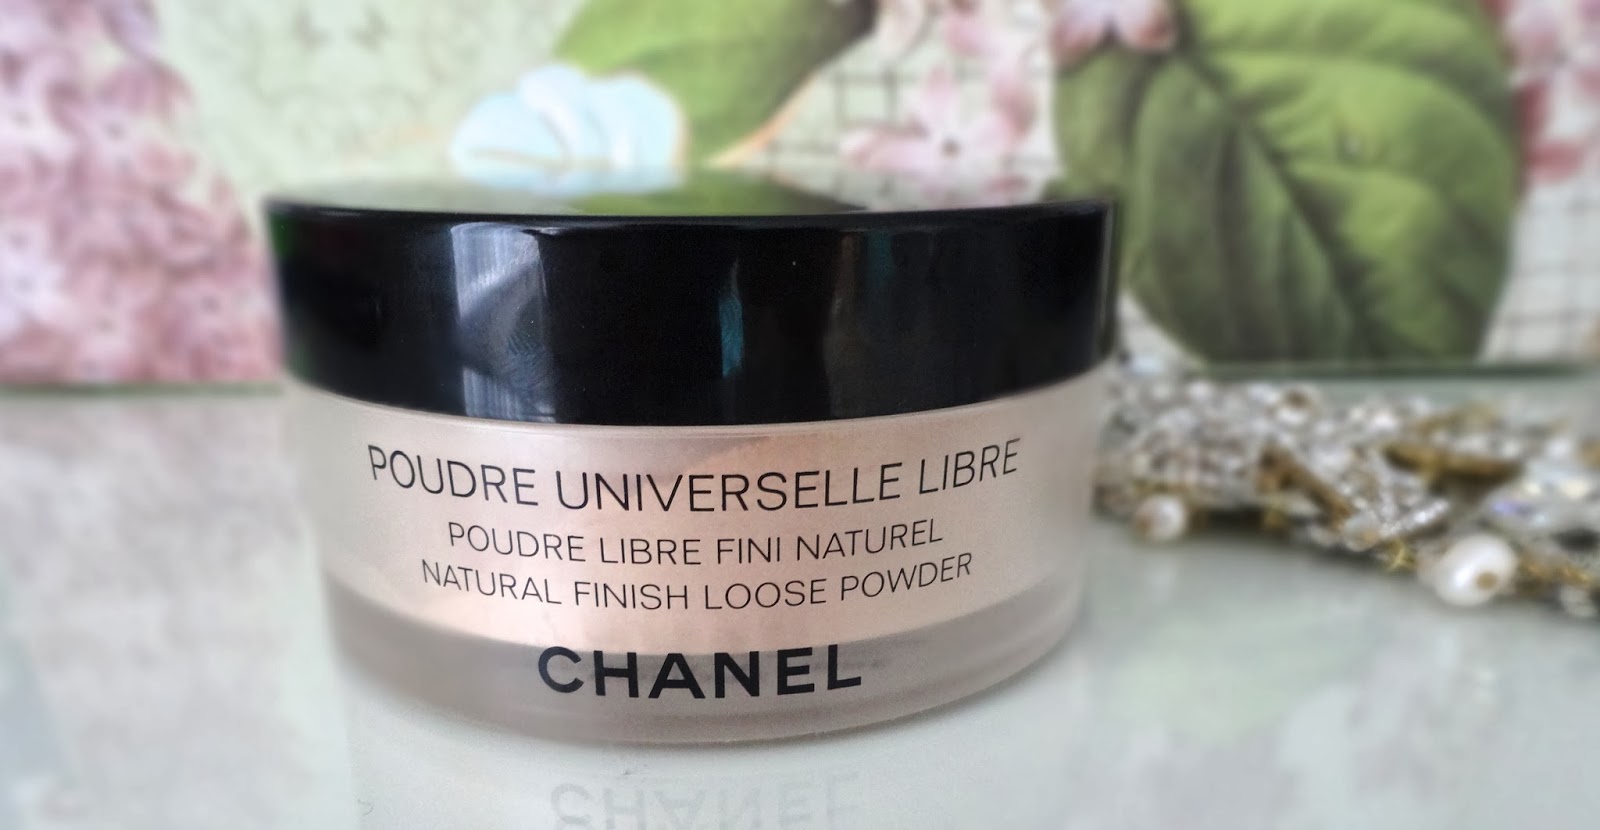 Let's makeup belle: Chanel : Poudre Universelle Libre Natural Finish Loose  Powder, Moonshine, Review and Swatches